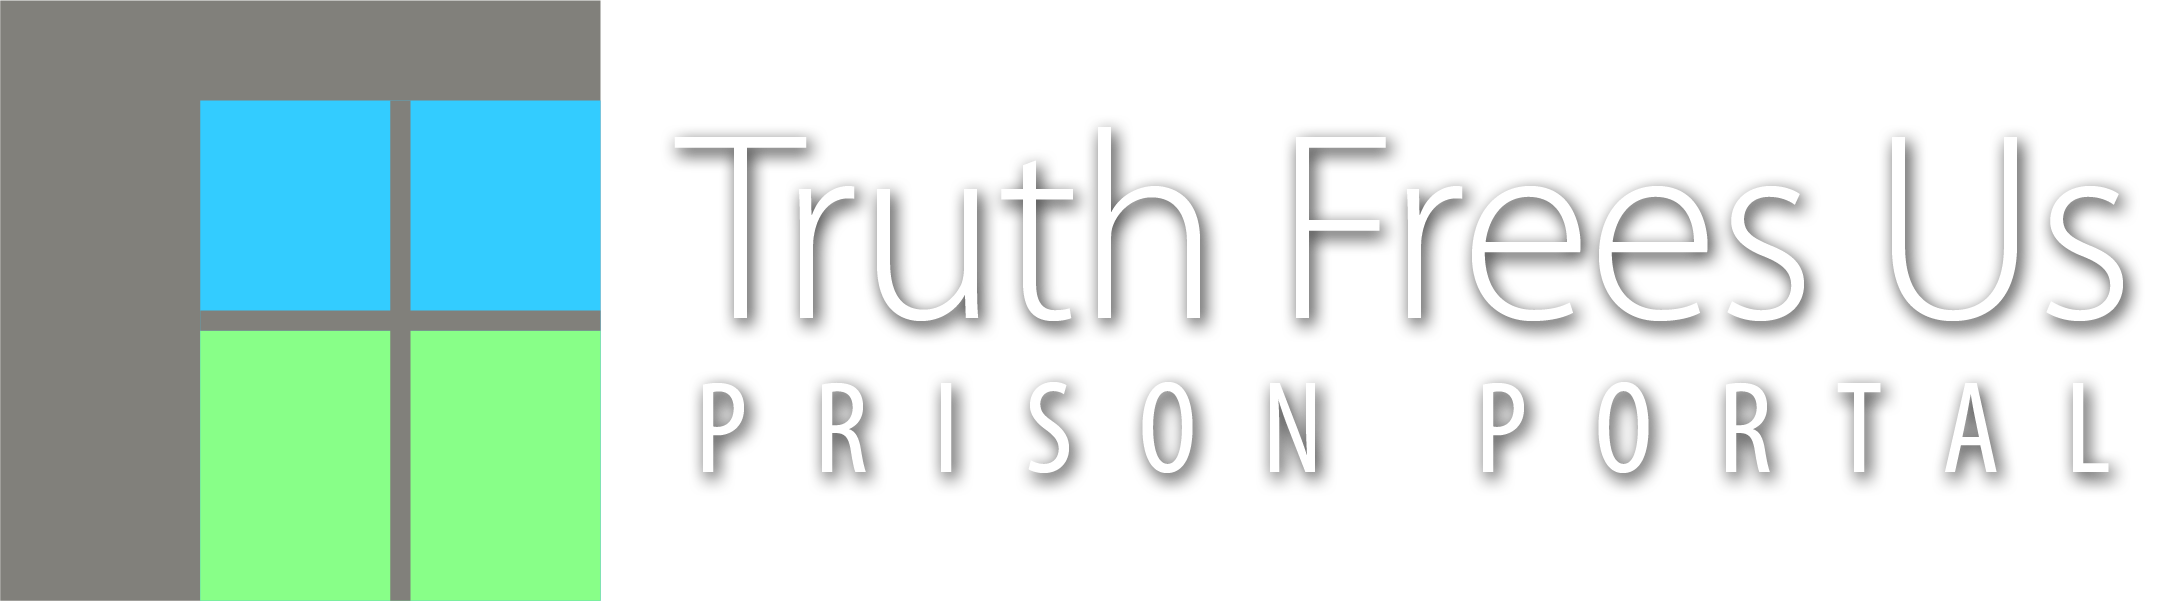 Truth Frees Us